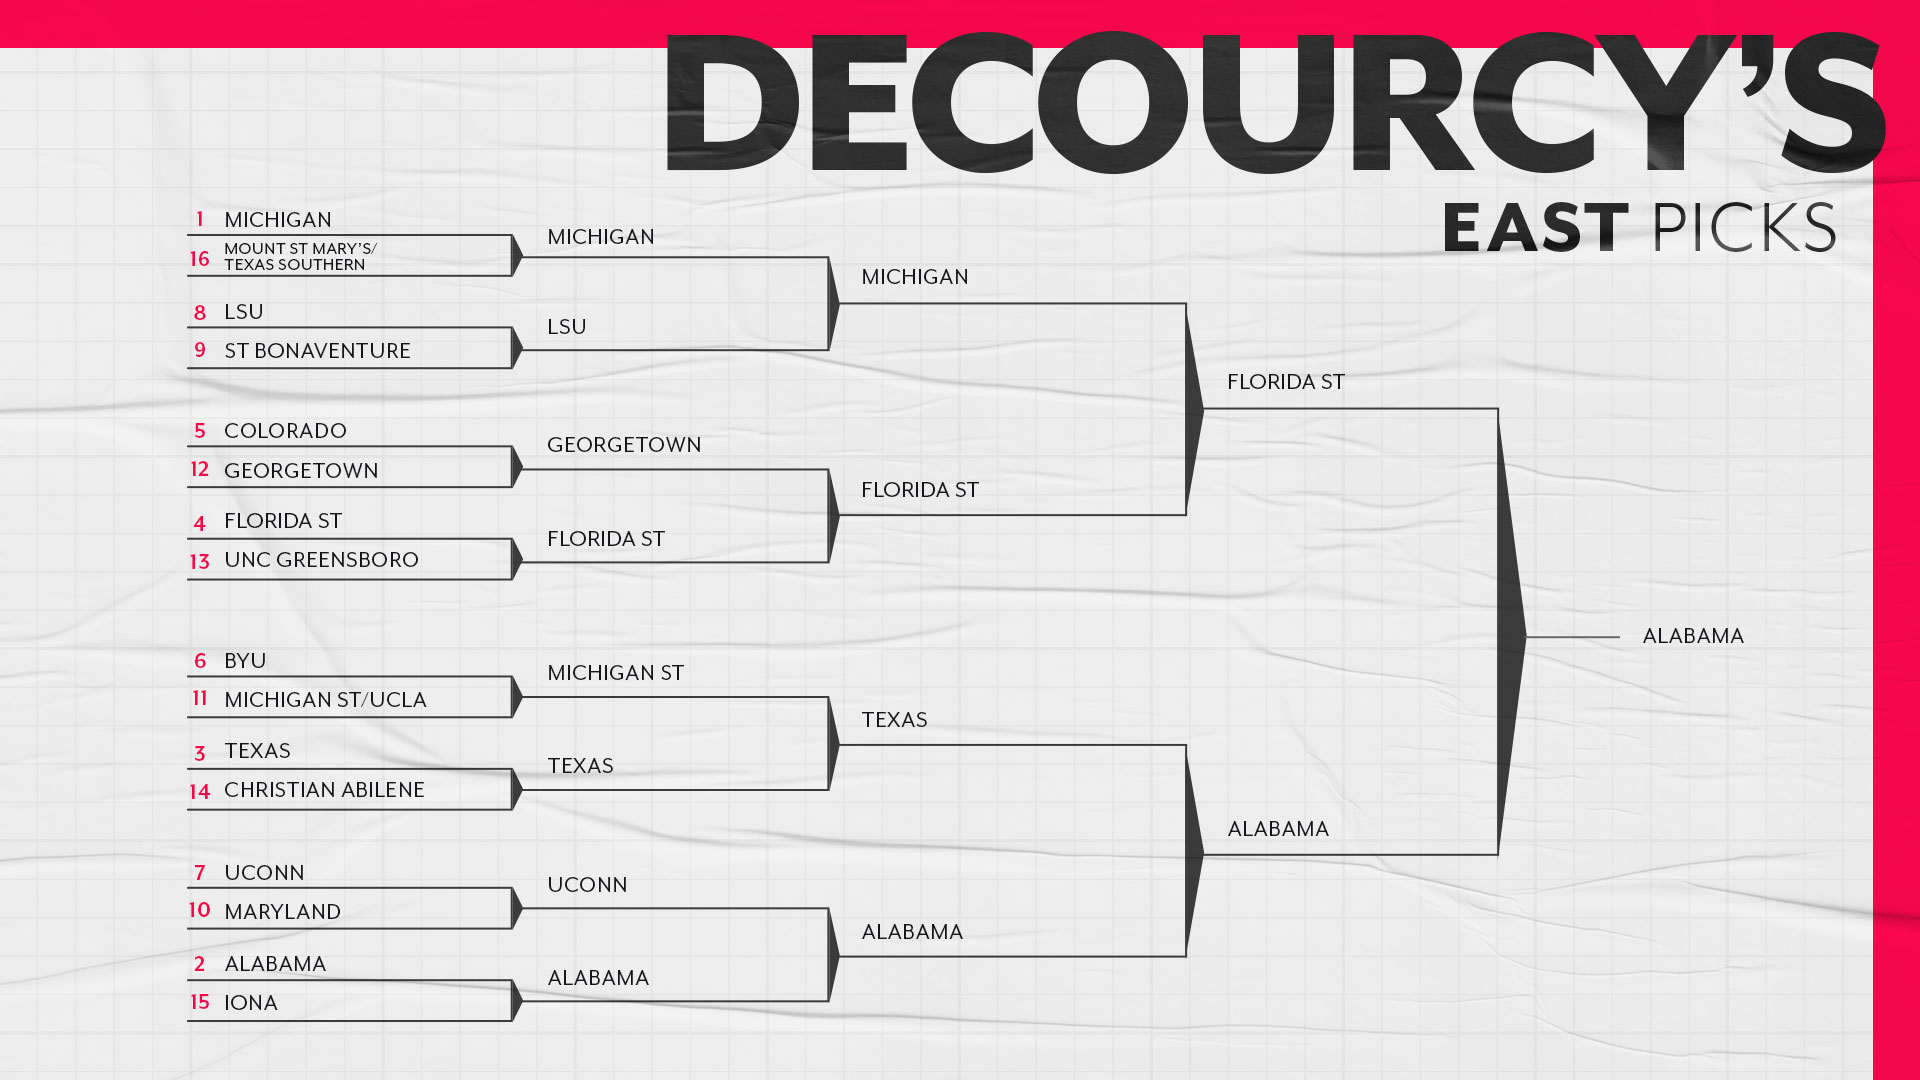 March Madness predictions 2021: Mike DeCourcy's expert NCAA Tournament bracket picks